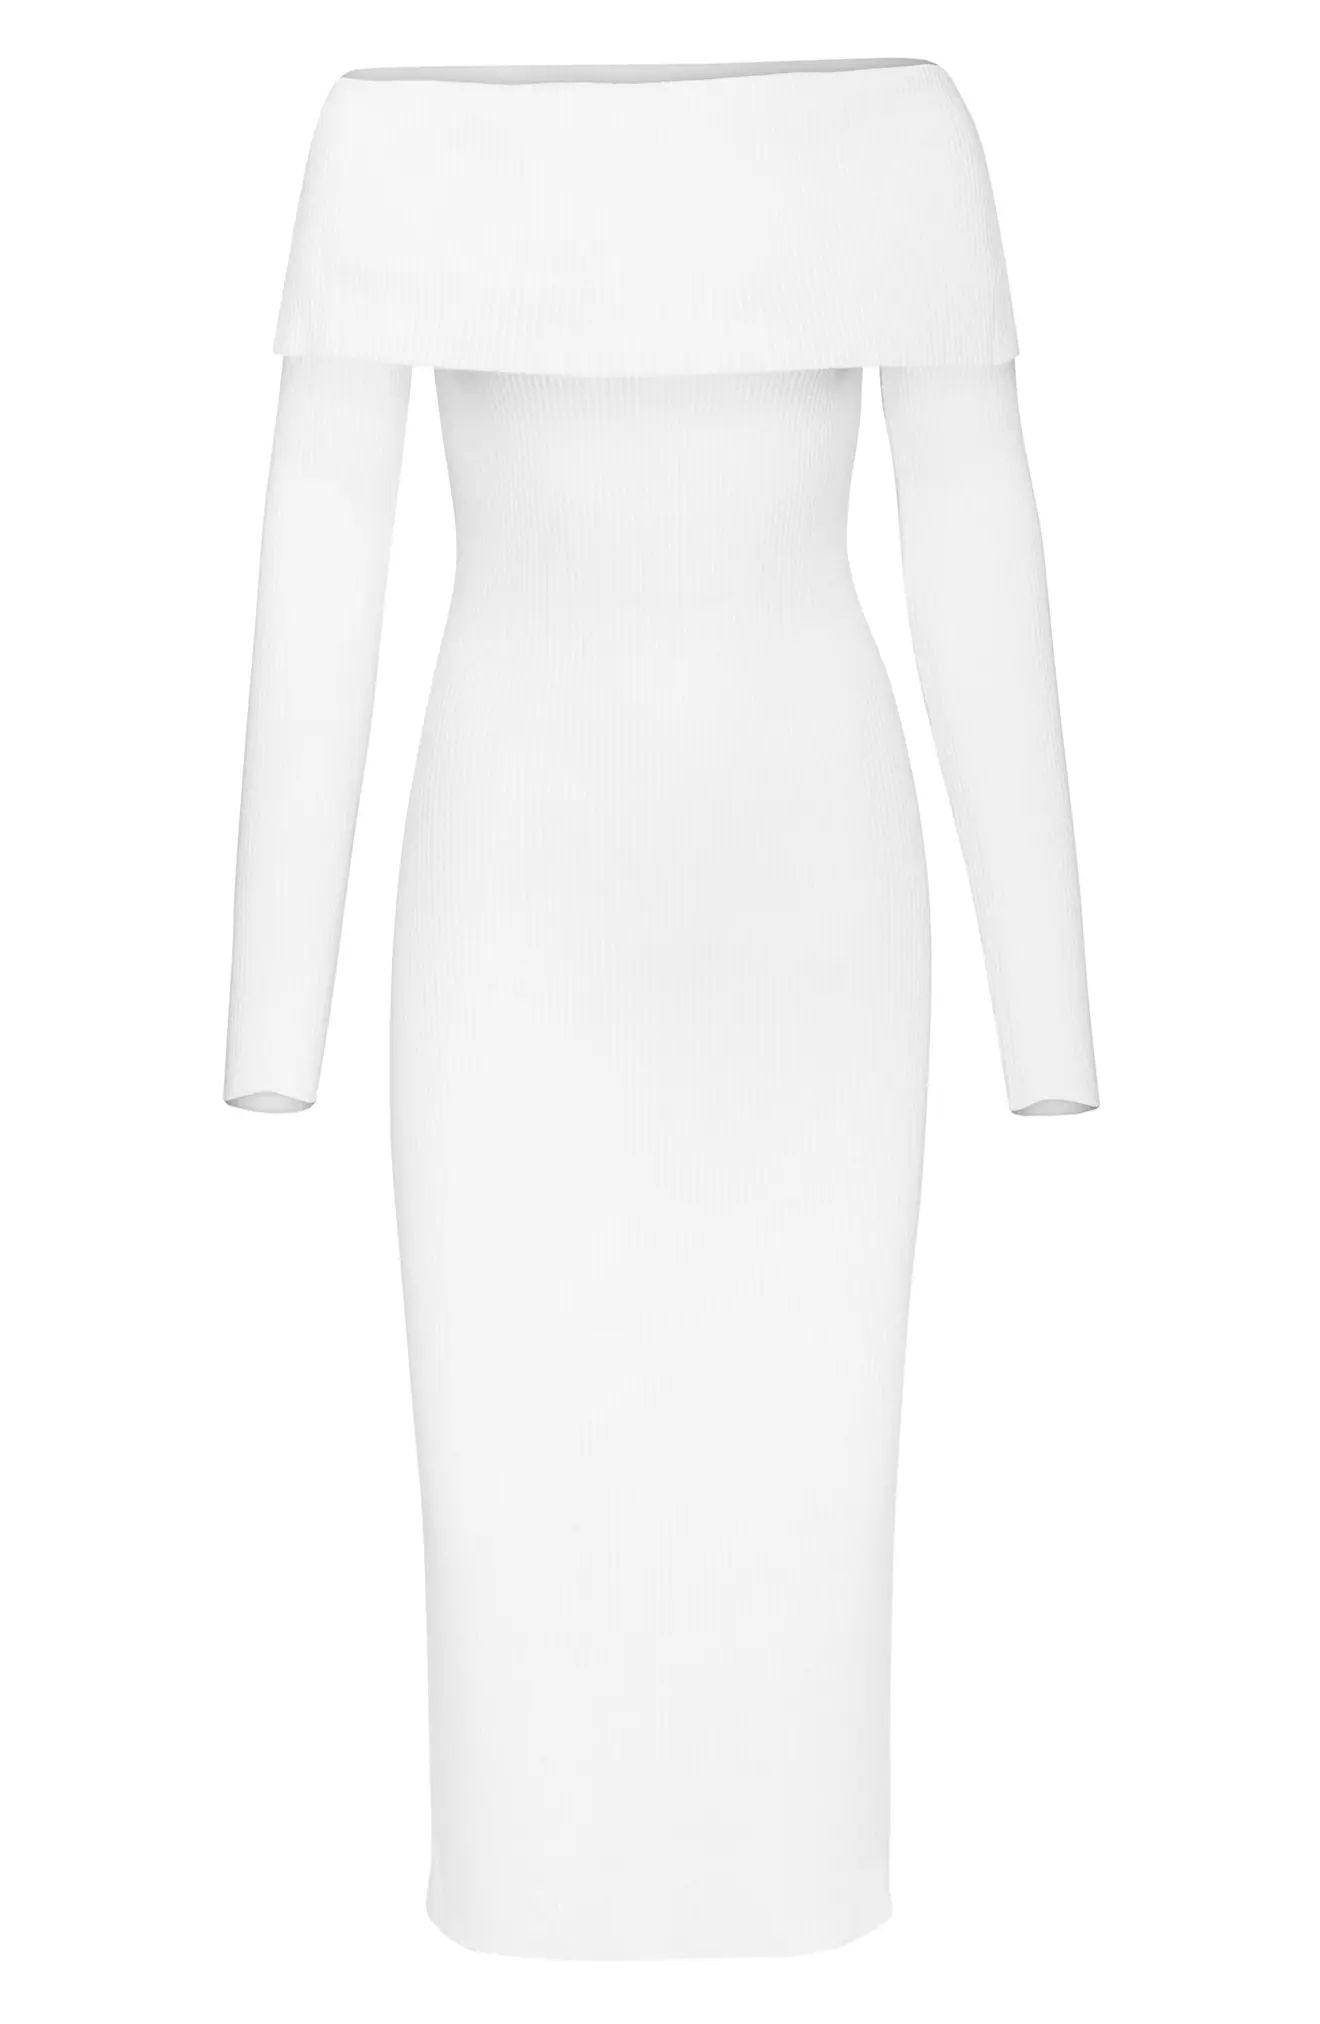 Women's Afrm Eloise Off The Shoulder Long Sleeve Sweater Dress, Size X-Large - White | Nordstrom